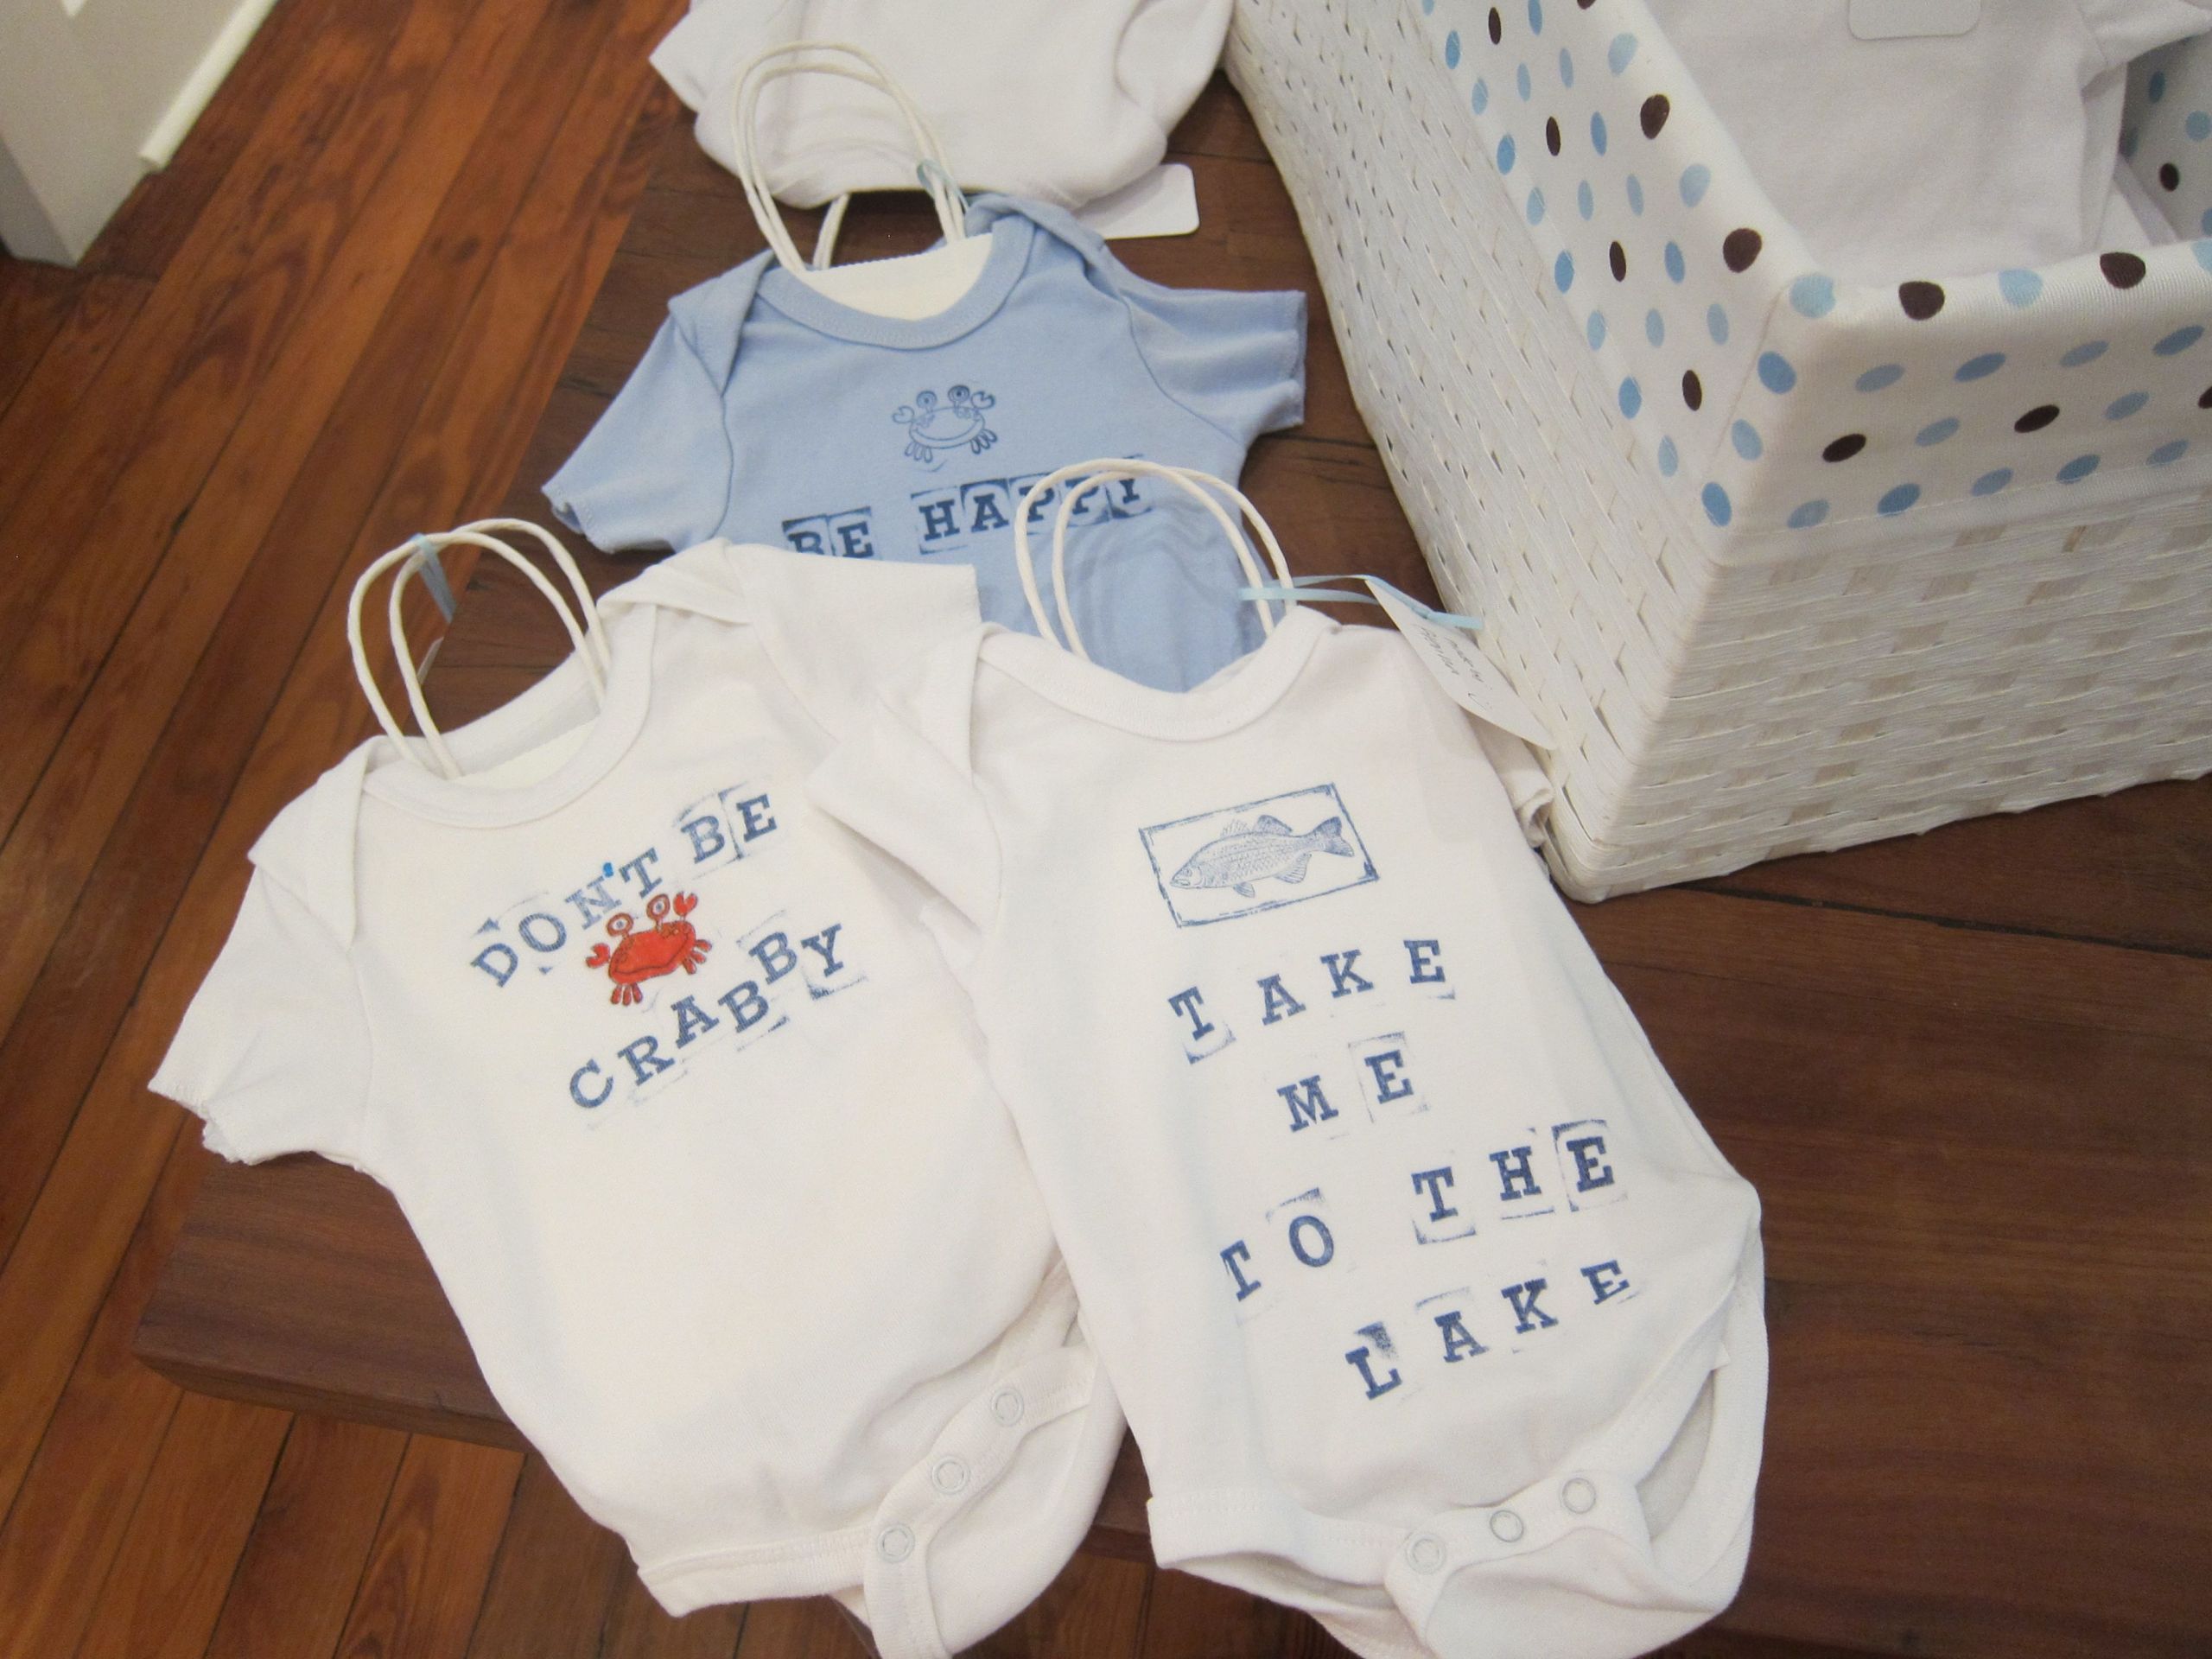 Baby Onesie Ideas For Decorating
 Supplies needed for a onesie decorating station pre